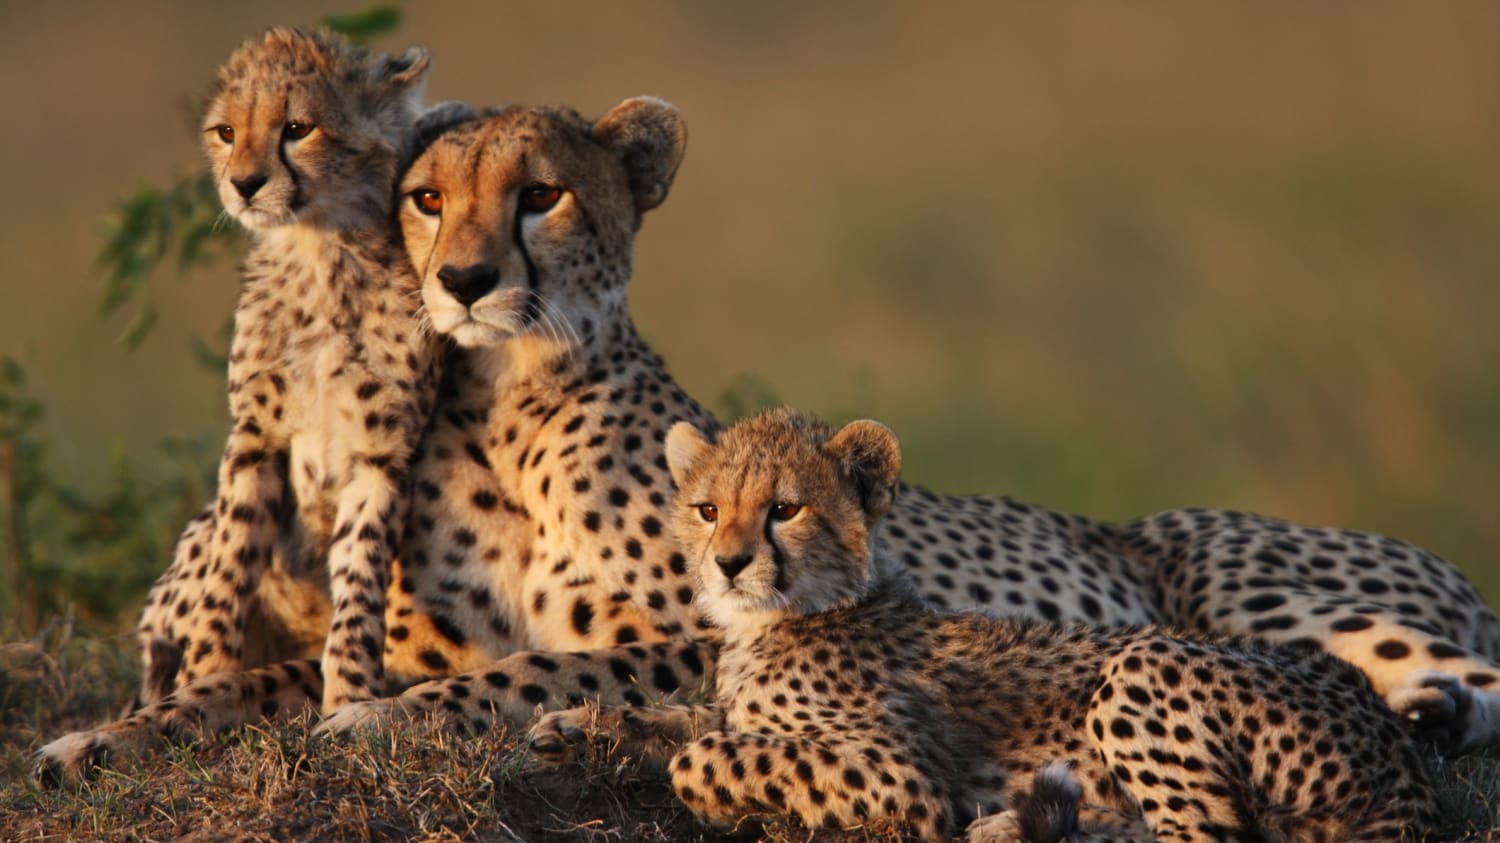 Inside the Matchmaking Service for Cheetahs